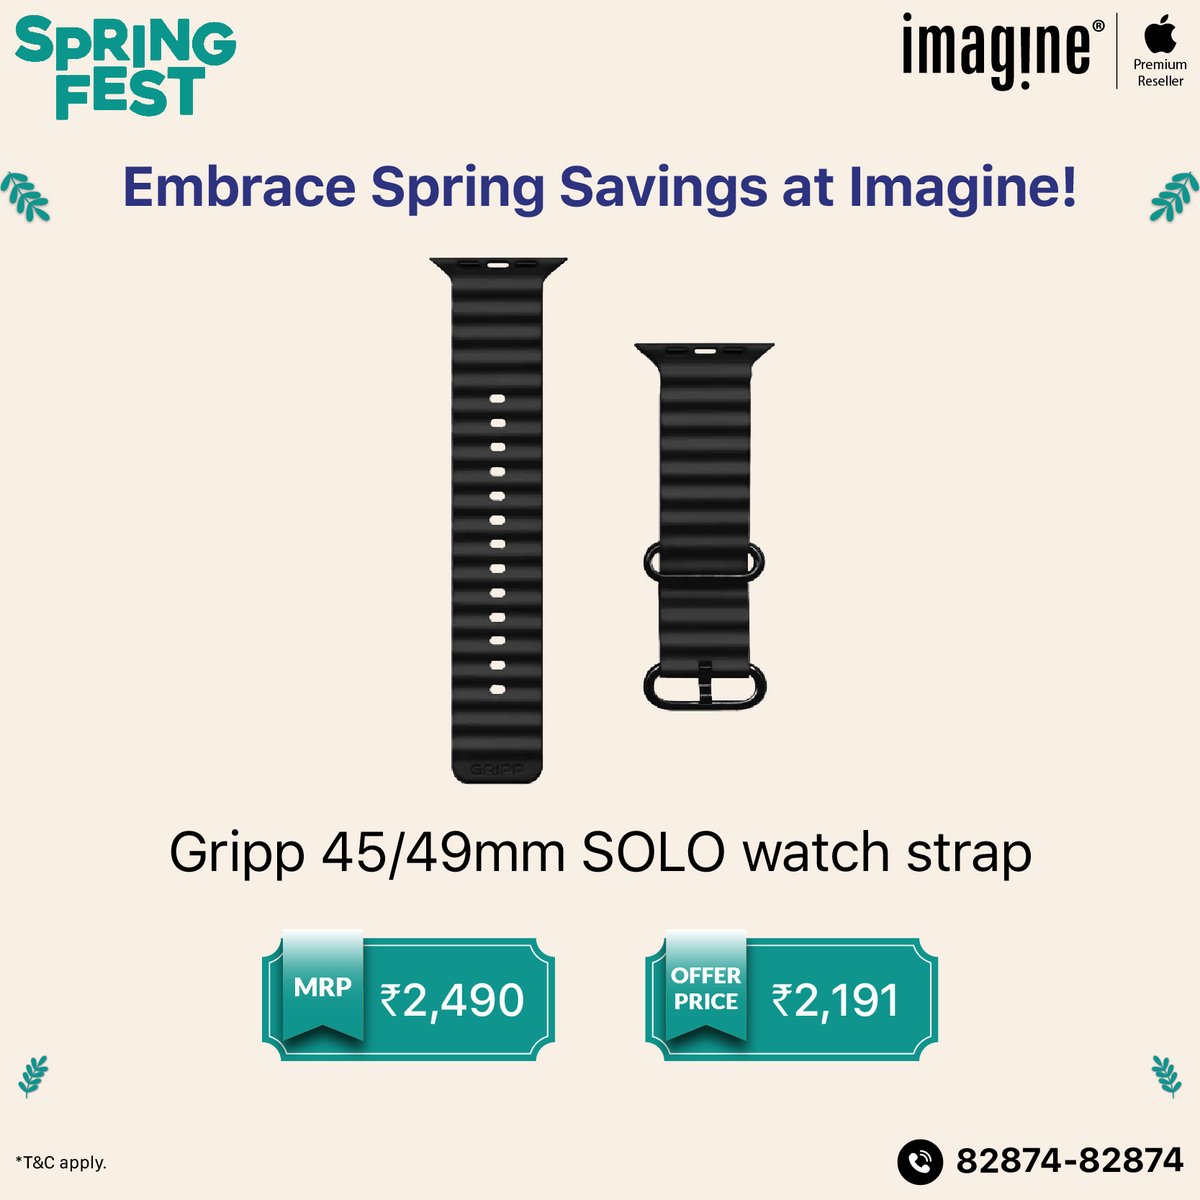 Embrace Spring Savings at Imagine! 🍃 Switch to latest Apple Watch now at Imagine! ✅ Upto ₹4,000* Instant Cashback on ICICI Bank Debit and Credit cards and SBI Credit cards. ✅ Upto ₹2,000* Instant In-store discount ✅ Get upto ₹2,000* Exchange bonus ✅ Get speaker worth